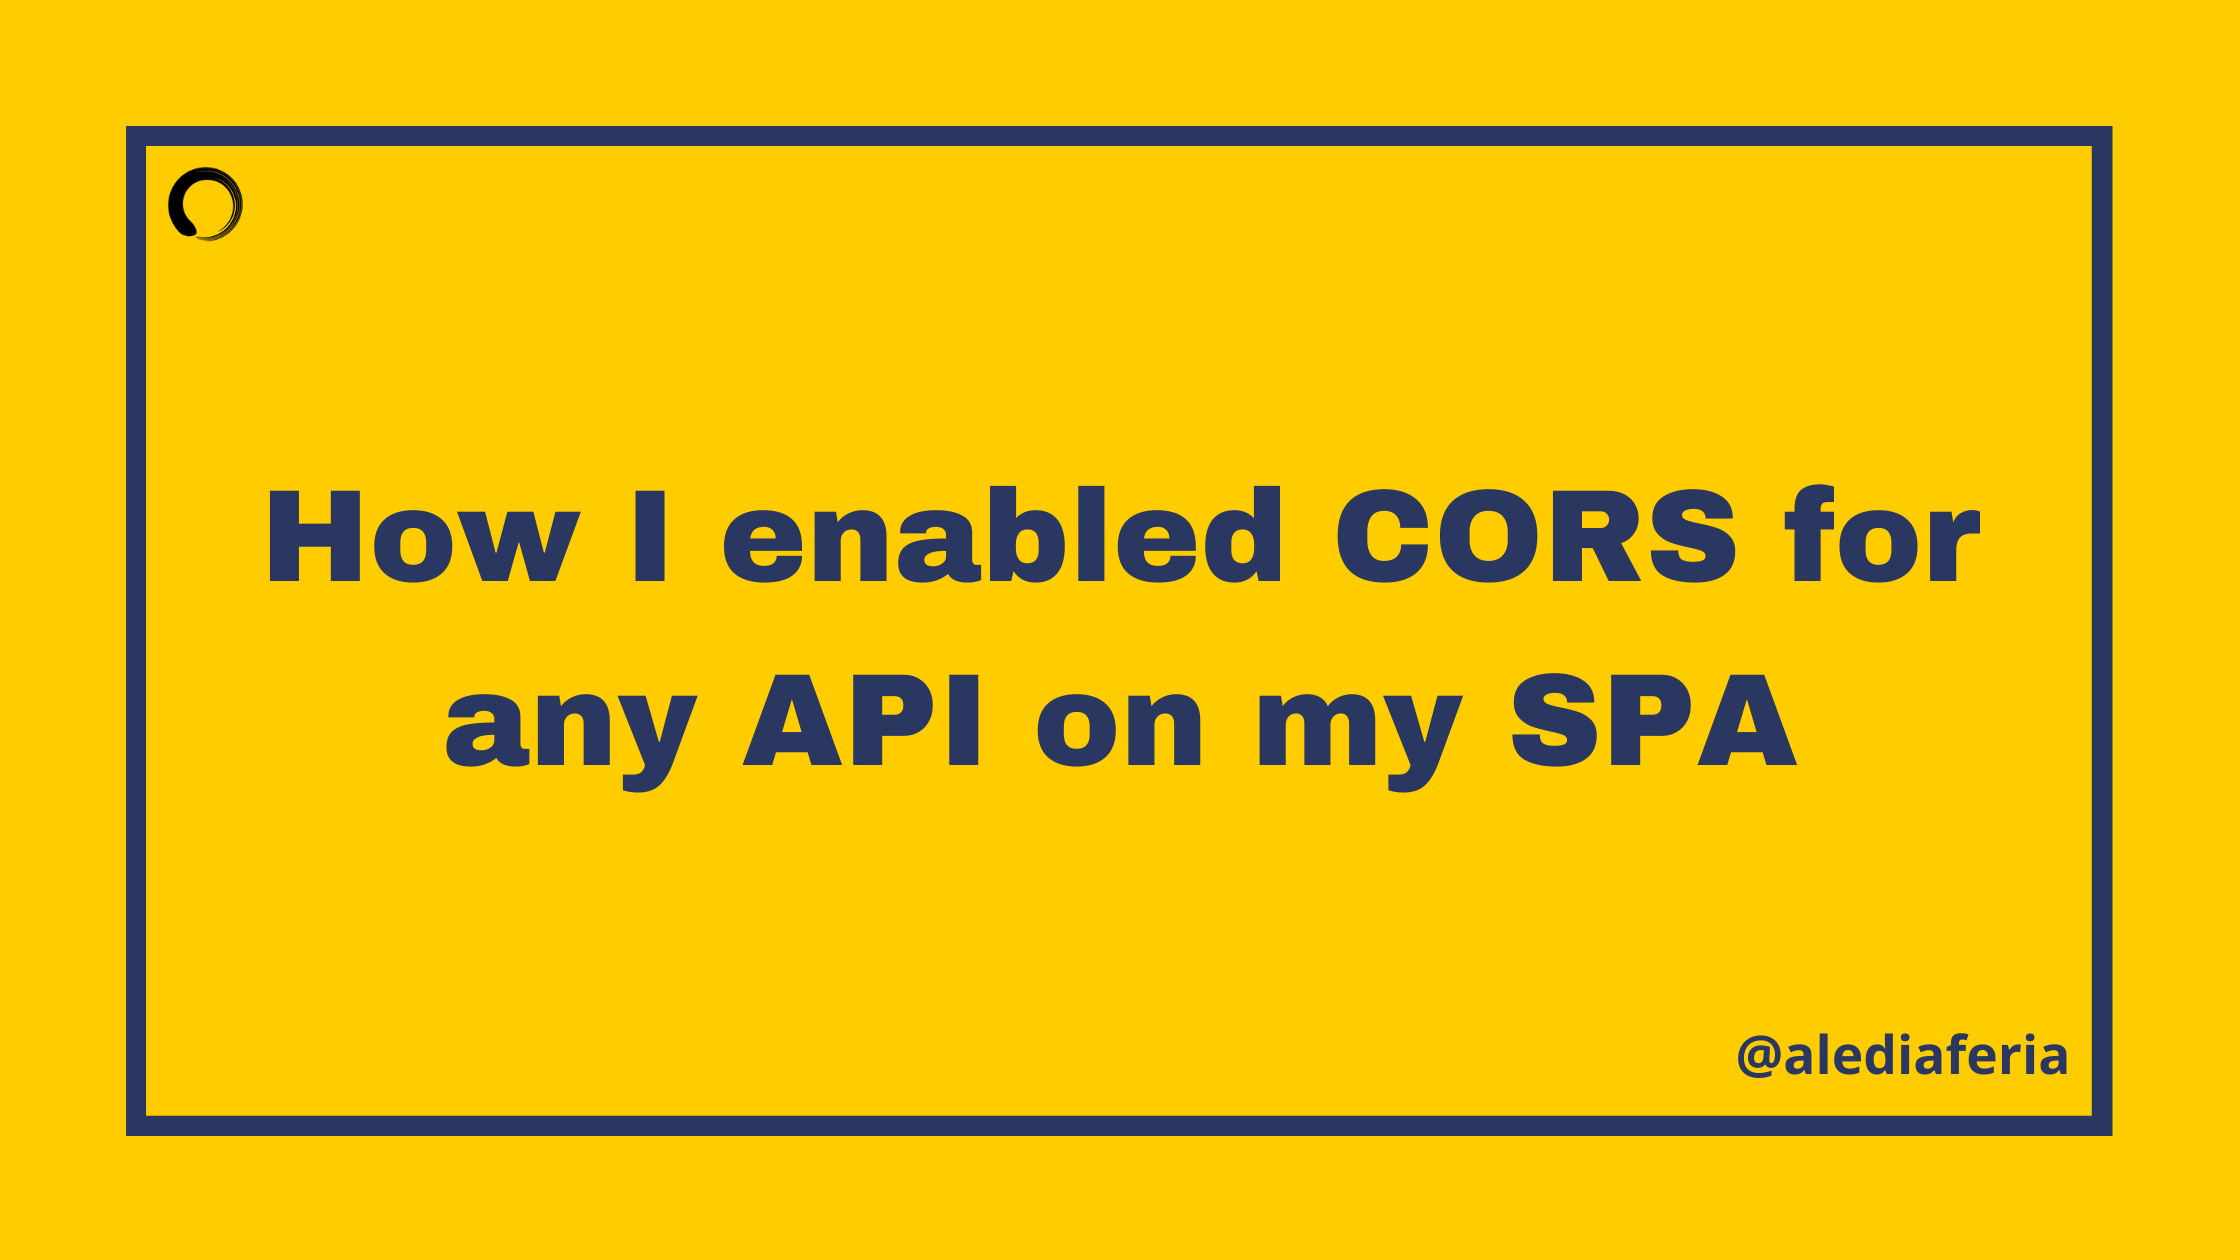 How I enabled CORS for any API on my Single Page App